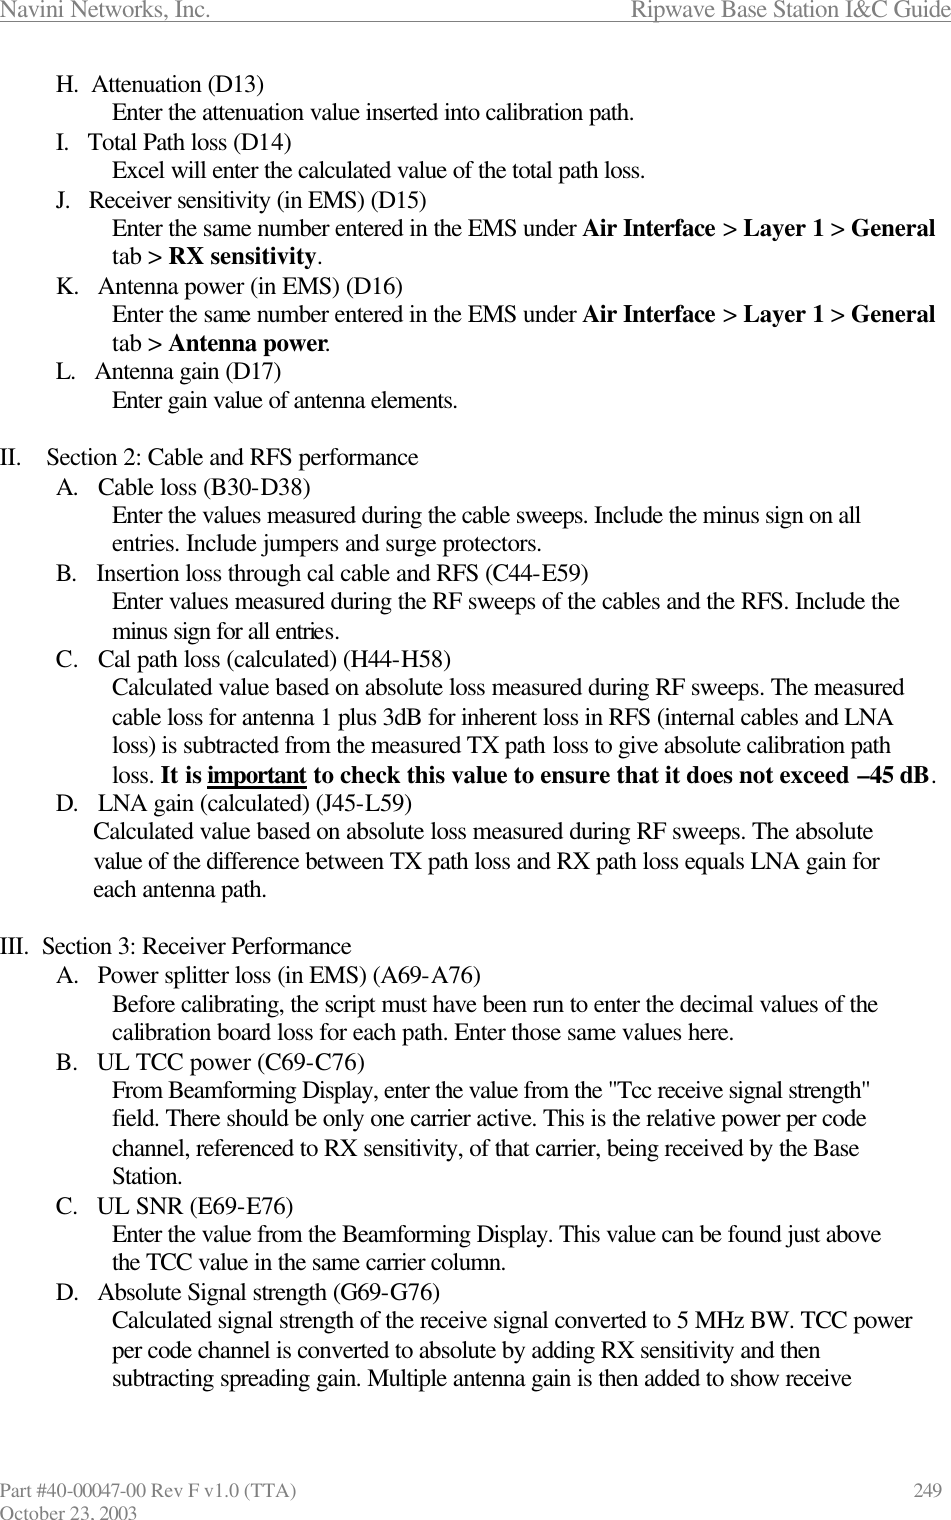 Navini Networks, Inc.                      Ripwave Base Station I&amp;C Guide Part #40-00047-00 Rev F v1.0 (TTA)            249 October 23, 2003 H.  Attenuation (D13) Enter the attenuation value inserted into calibration path. I.   Total Path loss (D14) Excel will enter the calculated value of the total path loss. J.   Receiver sensitivity (in EMS) (D15) Enter the same number entered in the EMS under Air Interface &gt; Layer 1 &gt; General tab &gt; RX sensitivity. K.   Antenna power (in EMS) (D16) Enter the same number entered in the EMS under Air Interface &gt; Layer 1 &gt; General tab &gt; Antenna power. L.   Antenna gain (D17) Enter gain value of antenna elements.  II.    Section 2: Cable and RFS performance A.   Cable loss (B30-D38) Enter the values measured during the cable sweeps. Include the minus sign on all entries. Include jumpers and surge protectors. B.   Insertion loss through cal cable and RFS (C44-E59) Enter values measured during the RF sweeps of the cables and the RFS. Include the minus sign for all entries. C.   Cal path loss (calculated) (H44-H58) Calculated value based on absolute loss measured during RF sweeps. The measured cable loss for antenna 1 plus 3dB for inherent loss in RFS (internal cables and LNA loss) is subtracted from the measured TX path loss to give absolute calibration path loss. It is important to check this value to ensure that it does not exceed –45 dB. D.   LNA gain (calculated) (J45-L59) Calculated value based on absolute loss measured during RF sweeps. The absolute value of the difference between TX path loss and RX path loss equals LNA gain for each antenna path.  III.  Section 3: Receiver Performance A.   Power splitter loss (in EMS) (A69-A76) Before calibrating, the script must have been run to enter the decimal values of the calibration board loss for each path. Enter those same values here. B.   UL TCC power (C69-C76) From Beamforming Display, enter the value from the &quot;Tcc receive signal strength&quot; field. There should be only one carrier active. This is the relative power per code channel, referenced to RX sensitivity, of that carrier, being received by the Base Station. C.   UL SNR (E69-E76) Enter the value from the Beamforming Display. This value can be found just above the TCC value in the same carrier column. D.   Absolute Signal strength (G69-G76) Calculated signal strength of the receive signal converted to 5 MHz BW. TCC power per code channel is converted to absolute by adding RX sensitivity and then subtracting spreading gain. Multiple antenna gain is then added to show receive 